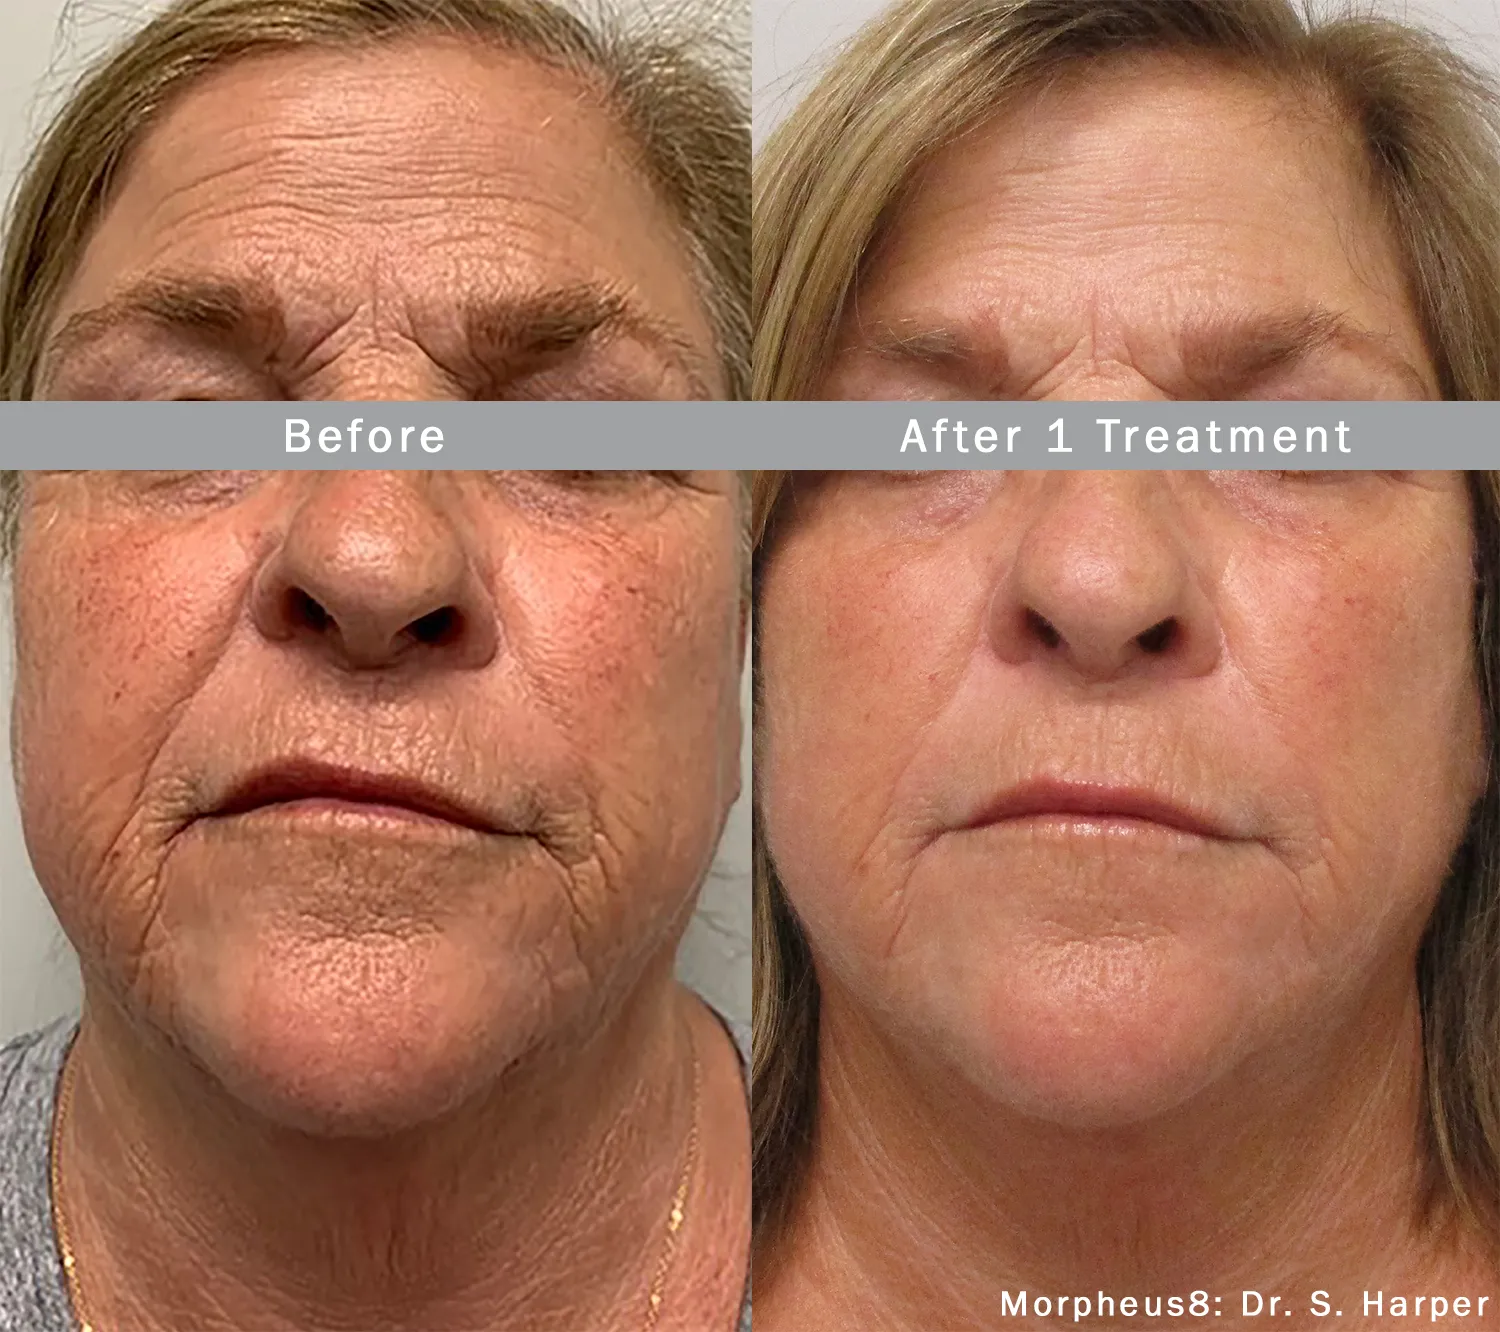 Before and After Morpheus8 Single Treatment